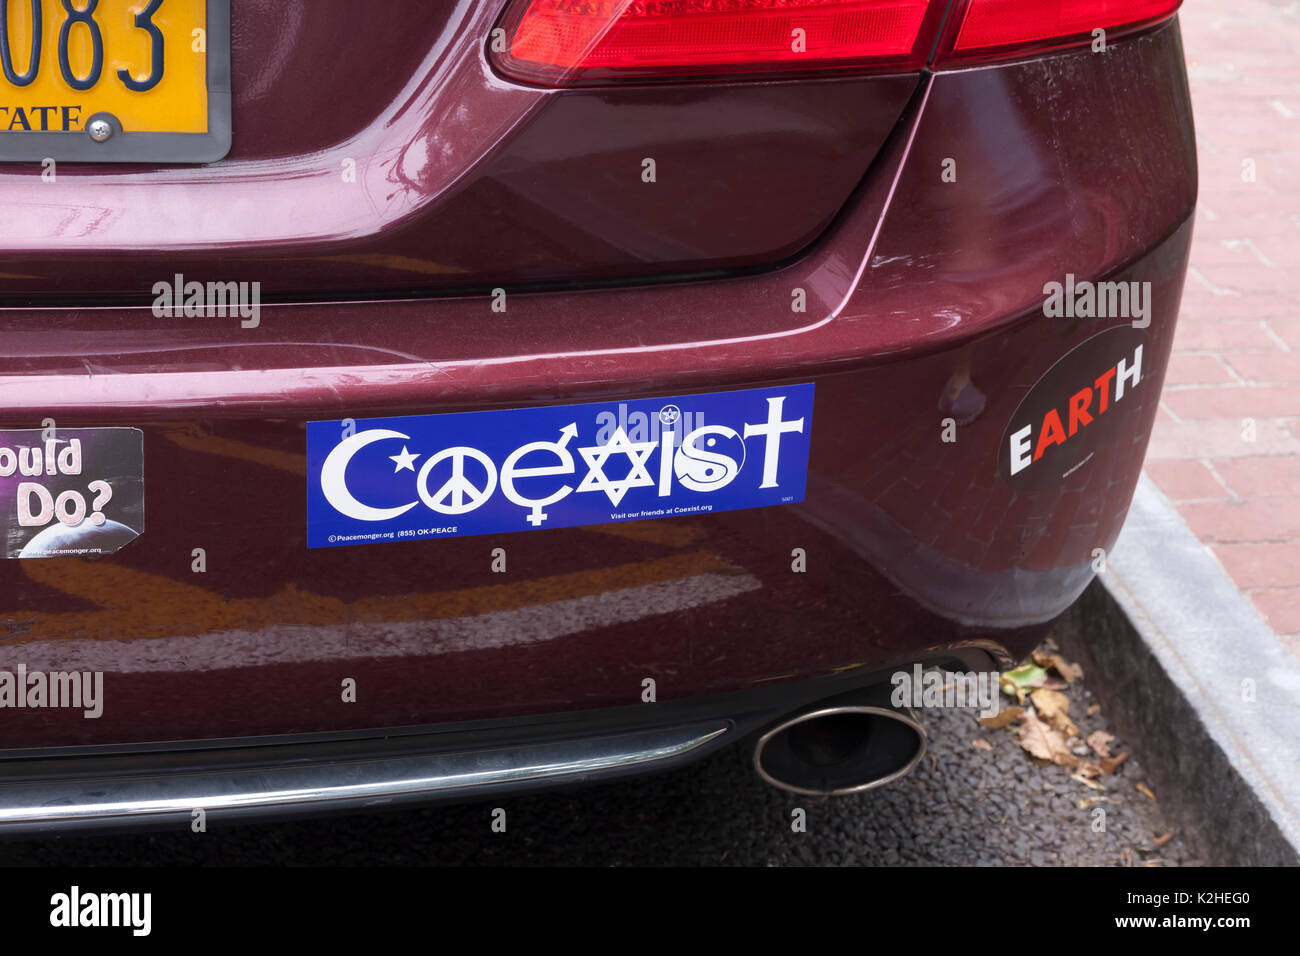 A COEXIST bumper sticker on a car showing the symbols of different religions in an effort to promote tolerance and multiculturalism. Stock Photo